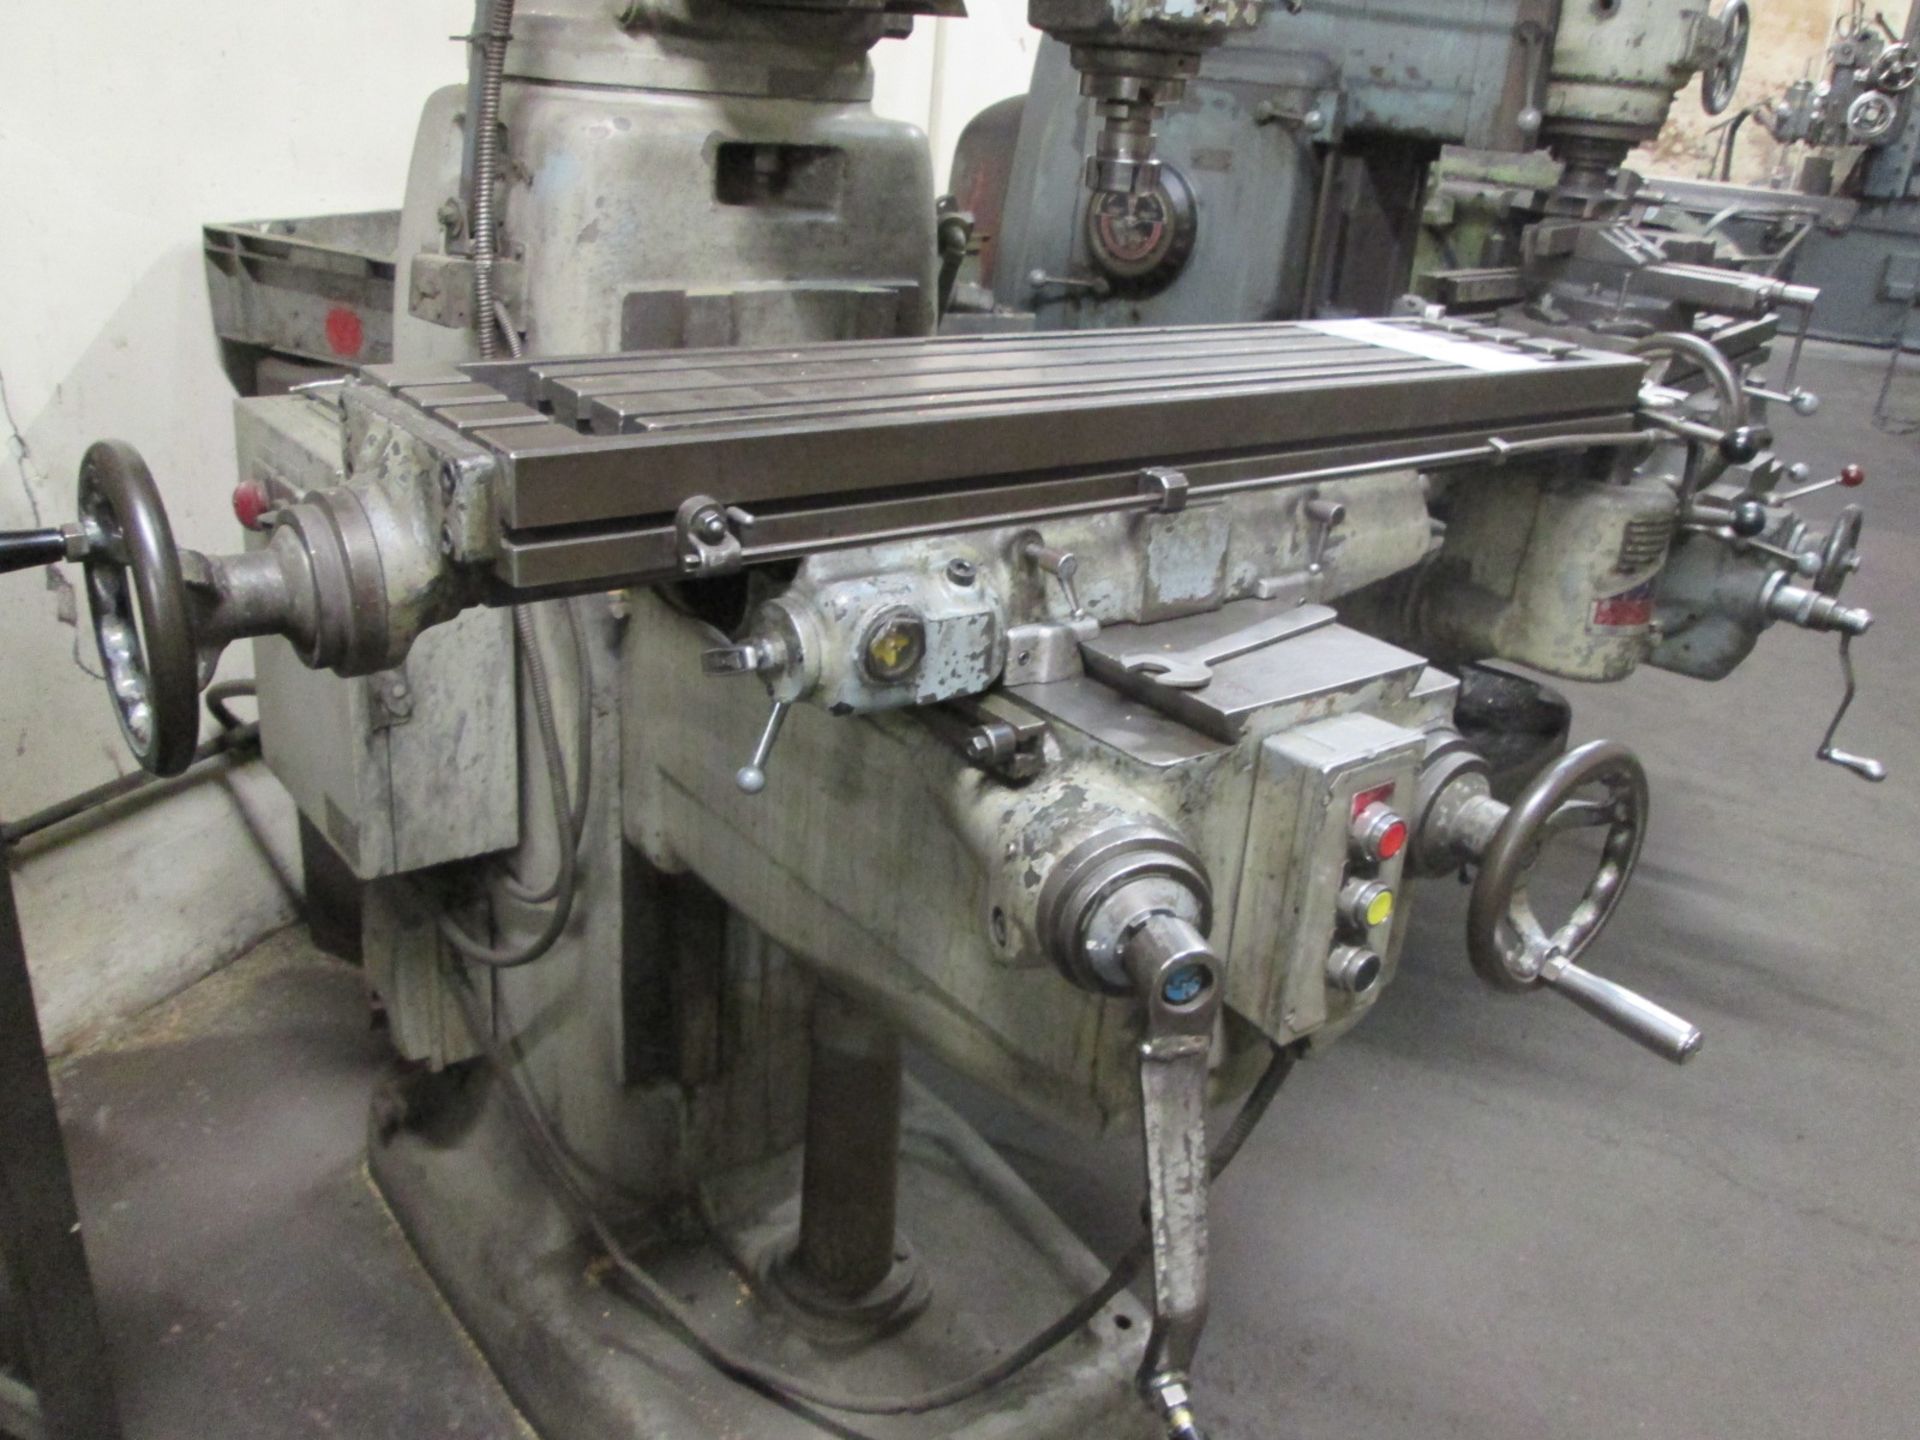 Induma Turret Head Milling Machine, Table size 1060 mm x 230 mm, Spindle speeds 65-2200 rpm (belt - Image 10 of 11